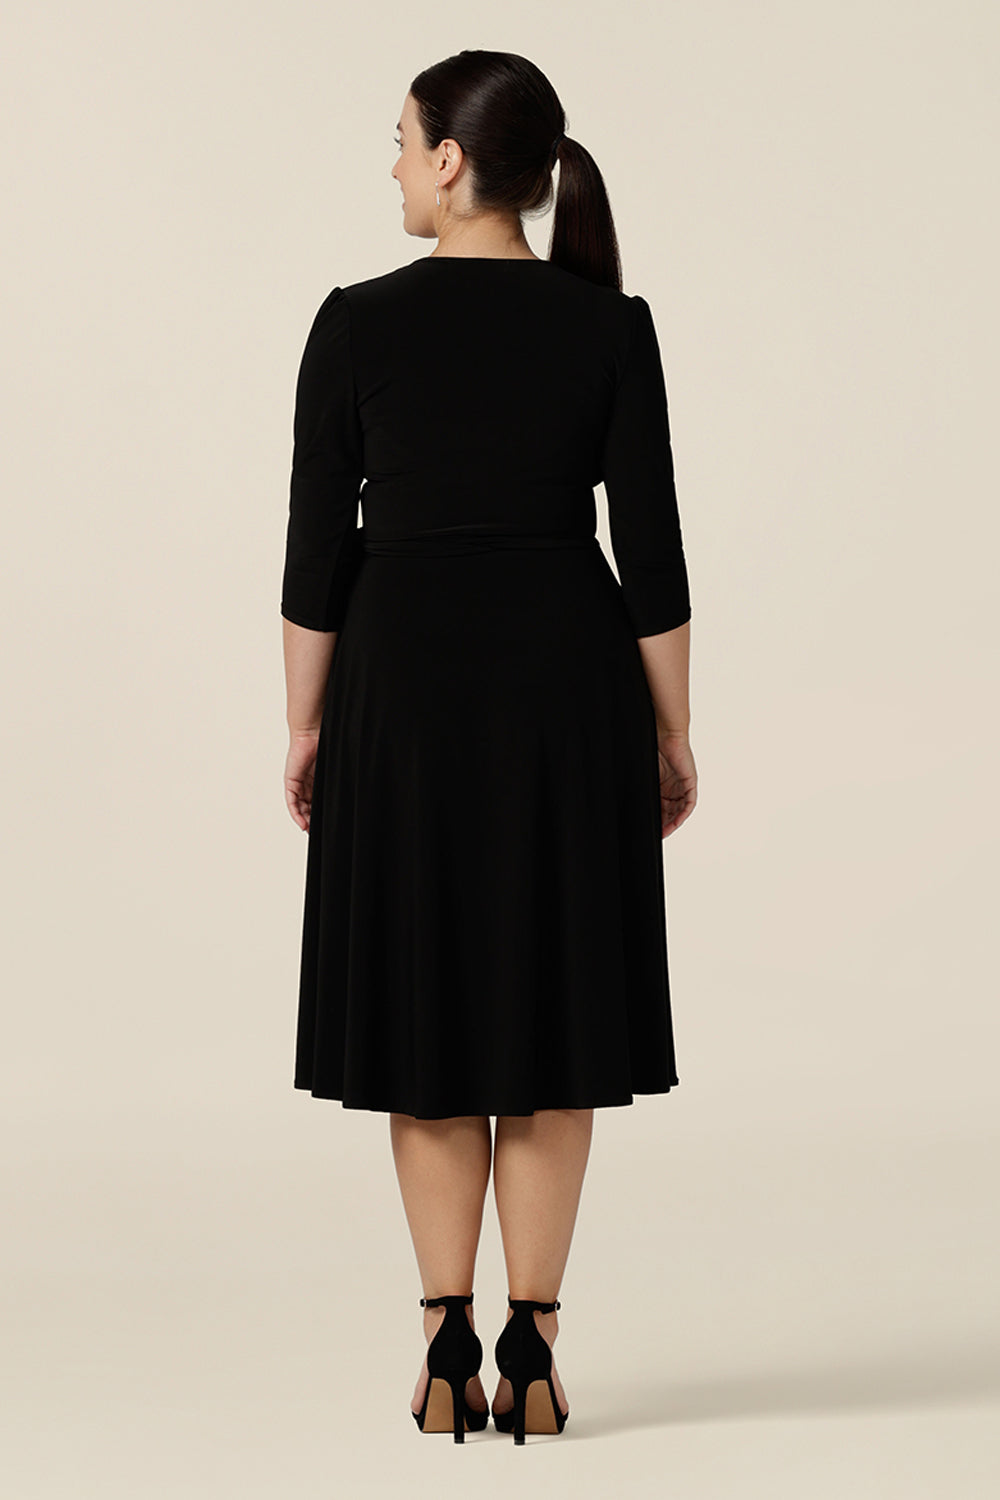 Back view of a knee length wrap dress in black jersey looking elegant as an evening and going out dress. Shown in size 10, this 3/4 sleeve event dress is made in Australia in dress sizes 8 to 24.